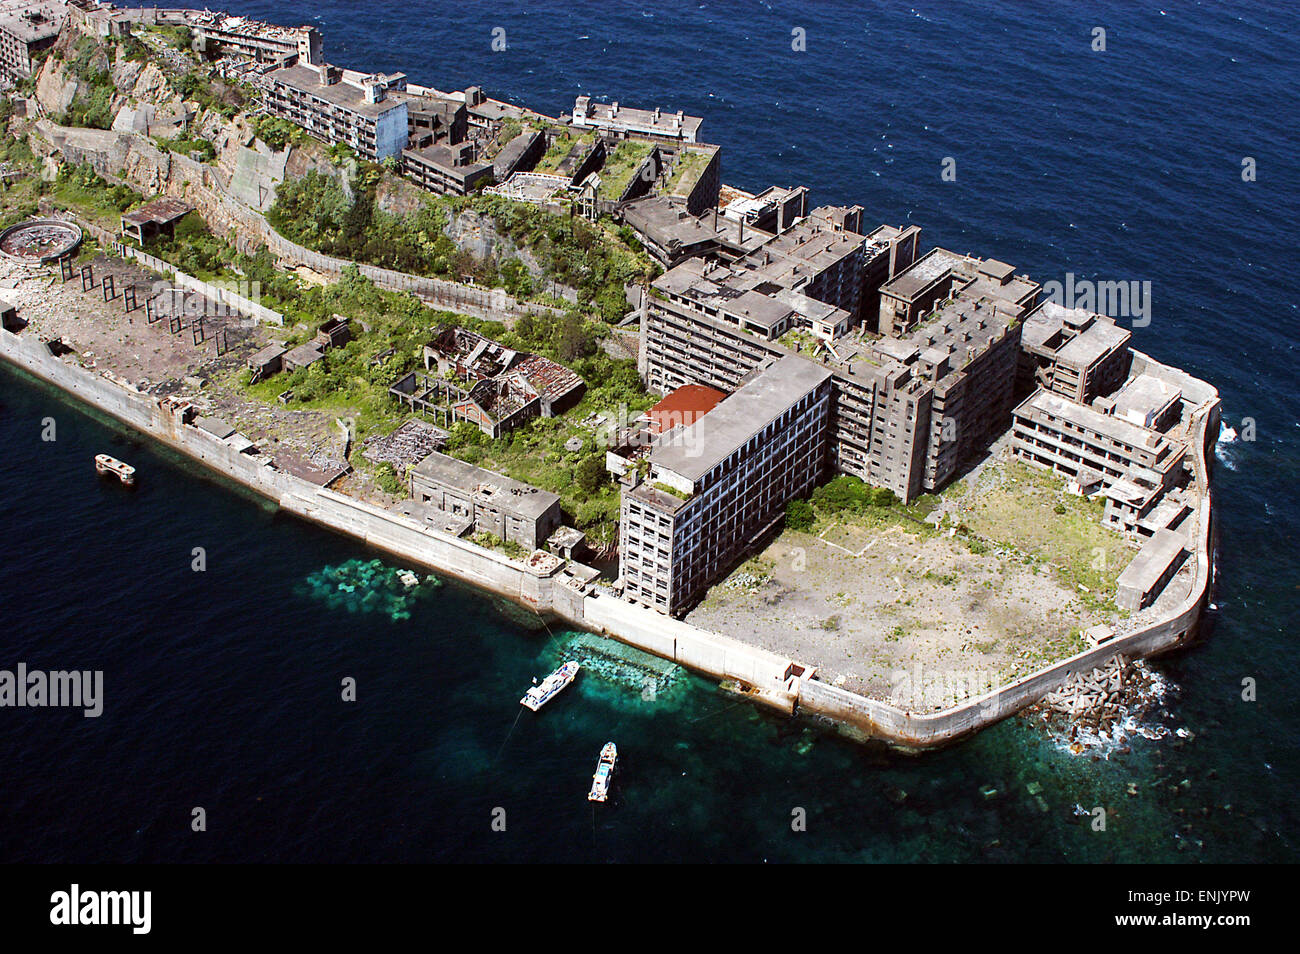 Hashima, Nagasaki, Japan. Also known as Gunkanjima (battleship island), it used to have coal mines and housed over 4,000 inhabitants. After it was abandoned in the mid 20th century the town turned into a ghost town. Stock Photo